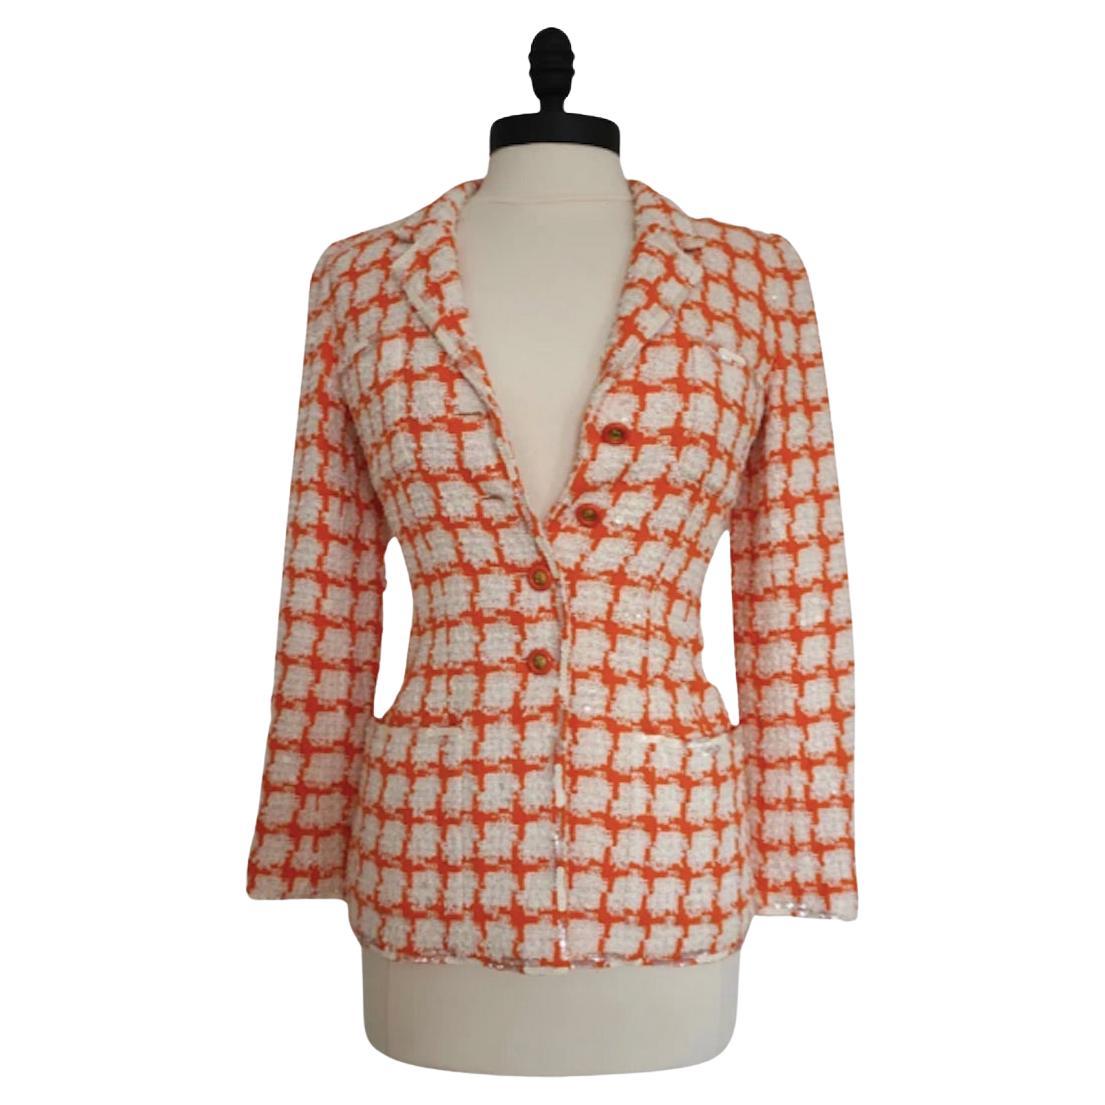 Chanel Spring 1995 Orange and White Sequined Tweed Jacket (Runway) For Sale